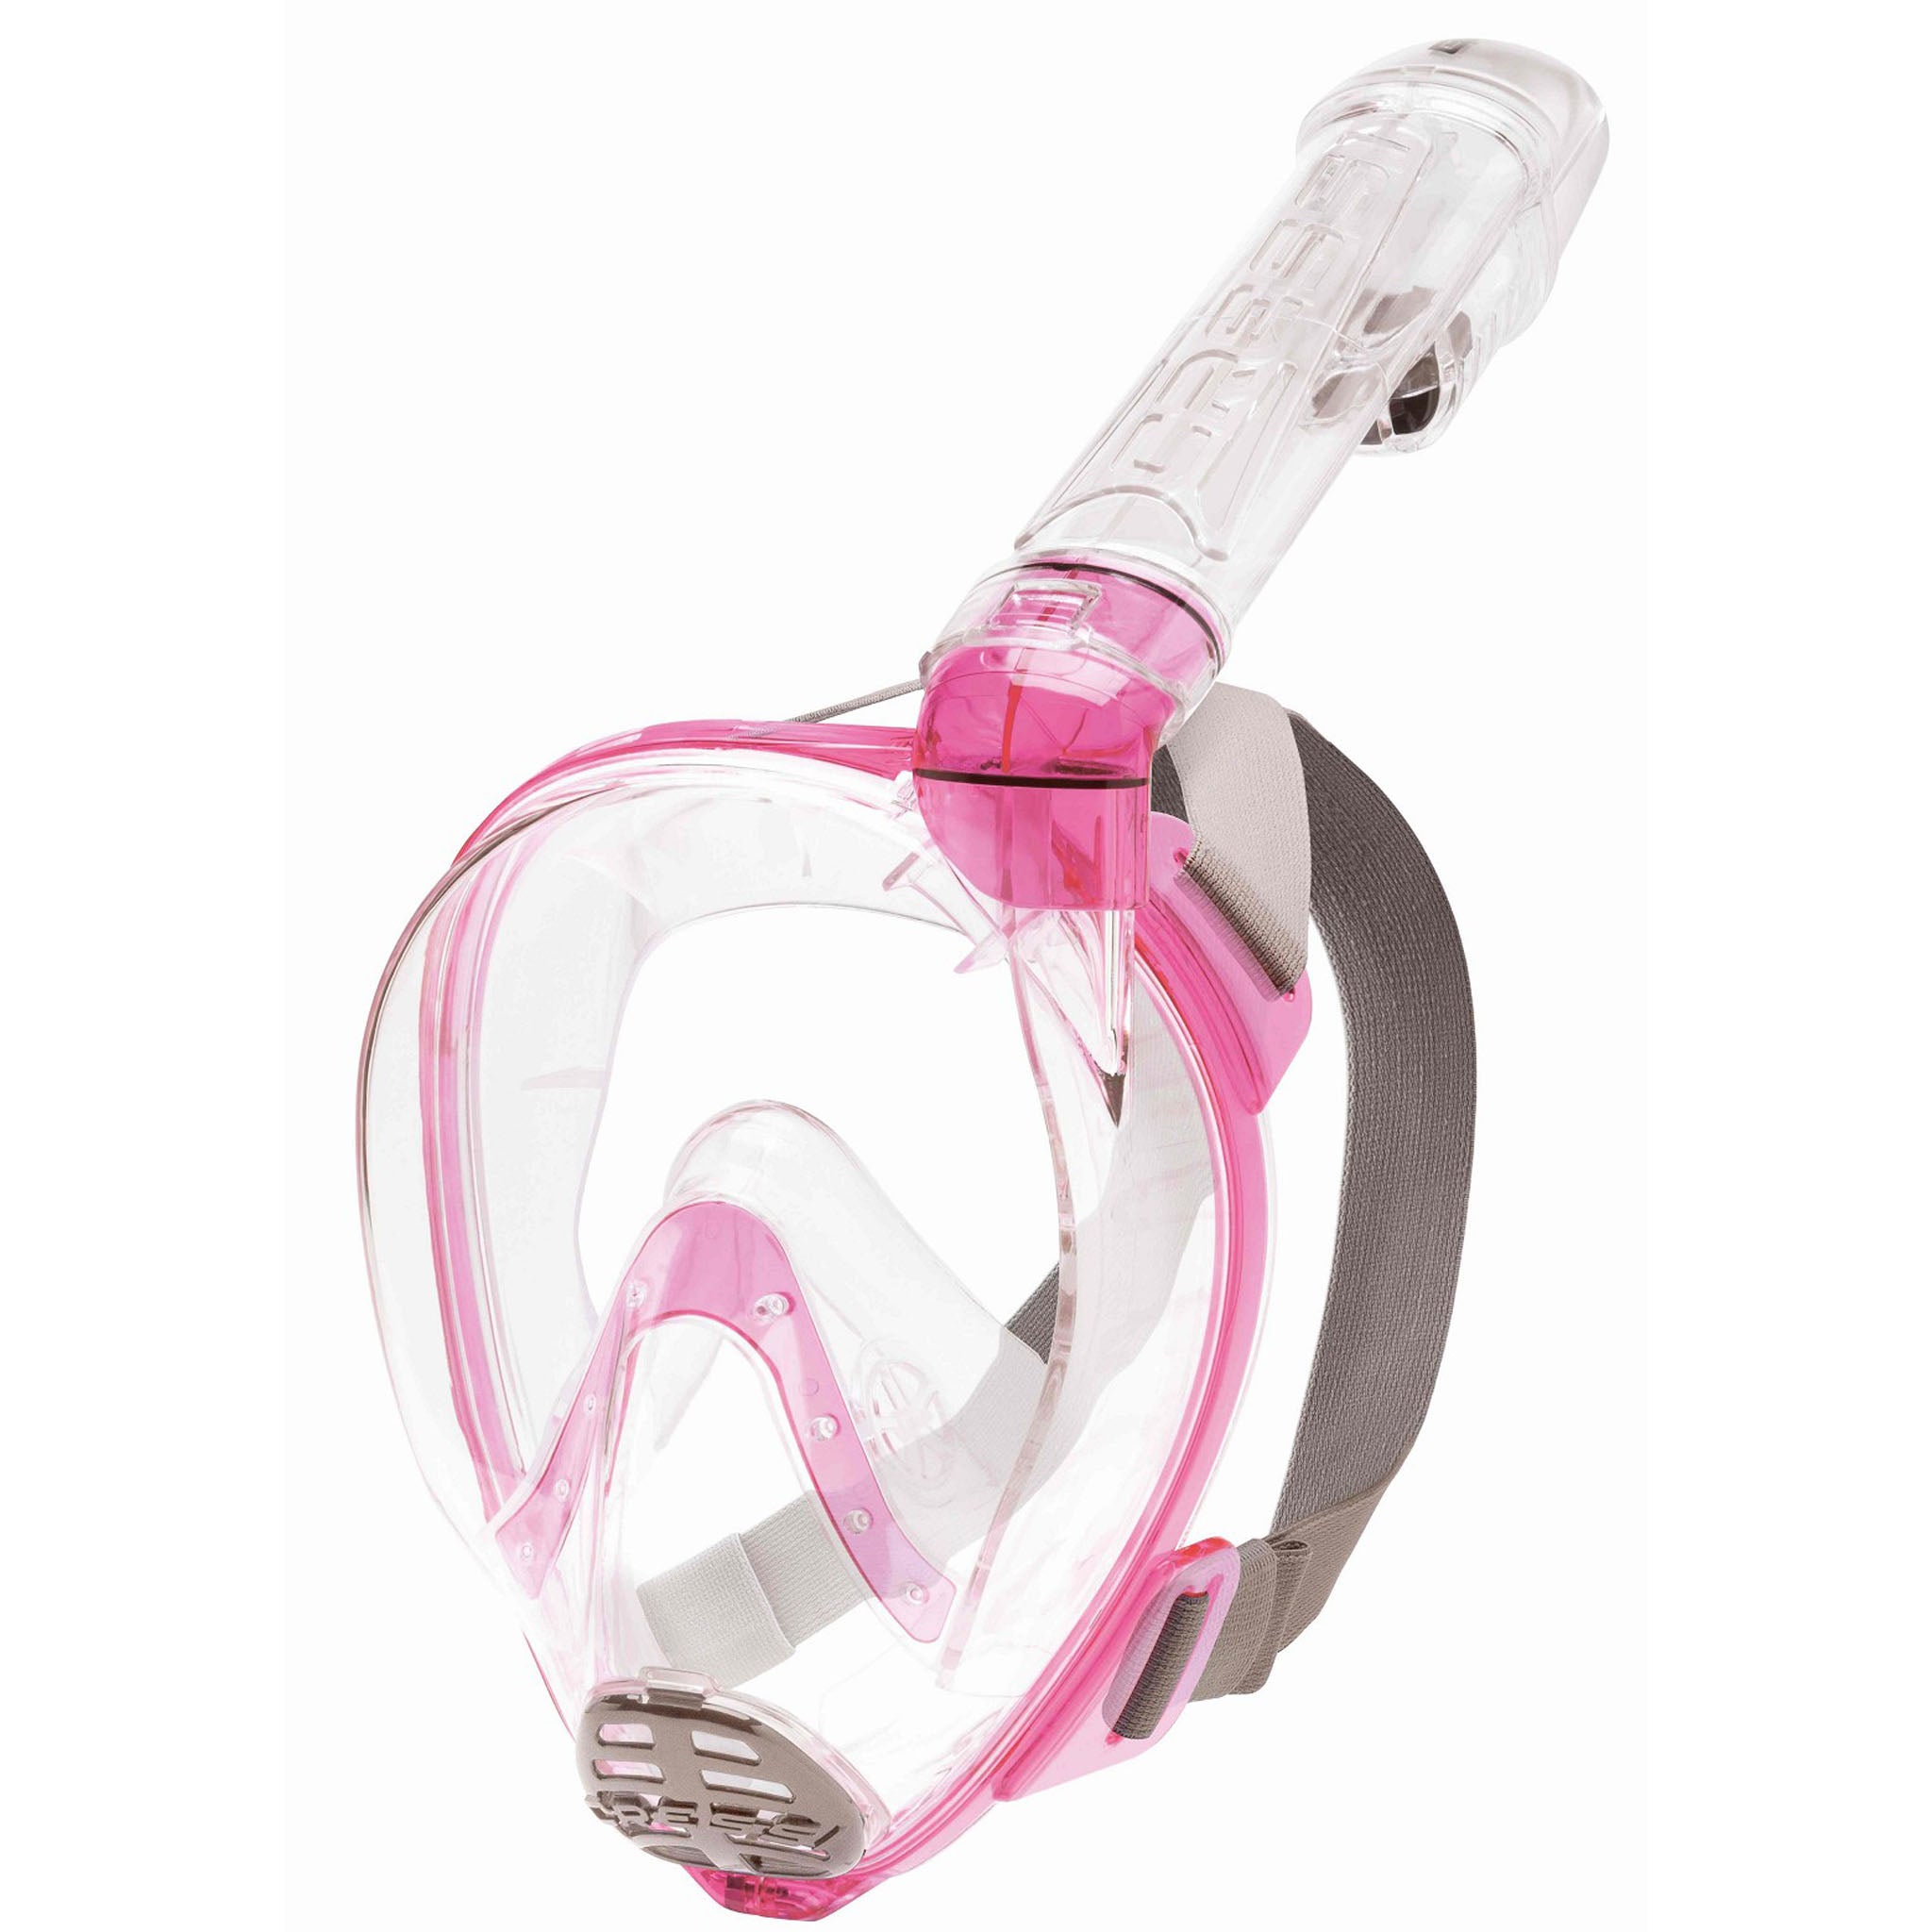 Travel Combo, Cressi Baron Snorkelling Mask with Agua Fins